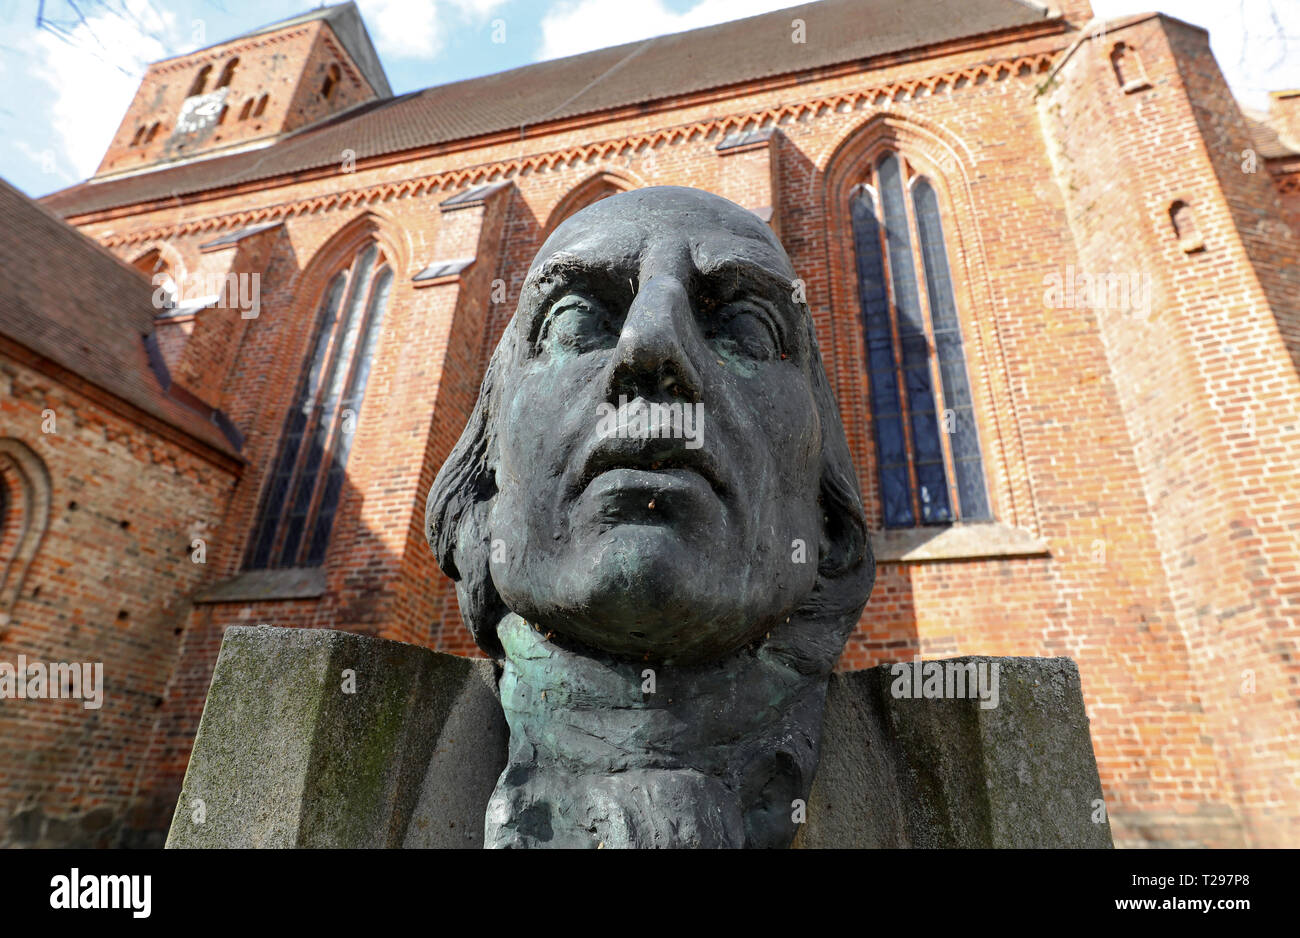 Penzlin, Germany. 25th Mar, 2019. A memorial, created by Walther Preik, commemorates the poet and Homer translator Johann Heinrich Voss (1751-1826), who went to school in the opposite principal's house. On 29.03.2019 a house of literature will be opened in the former Voss school building. Credit: Bernd Wüstneck/dpa-Zentralbild/ZB/dpa/Alamy Live News Stock Photo